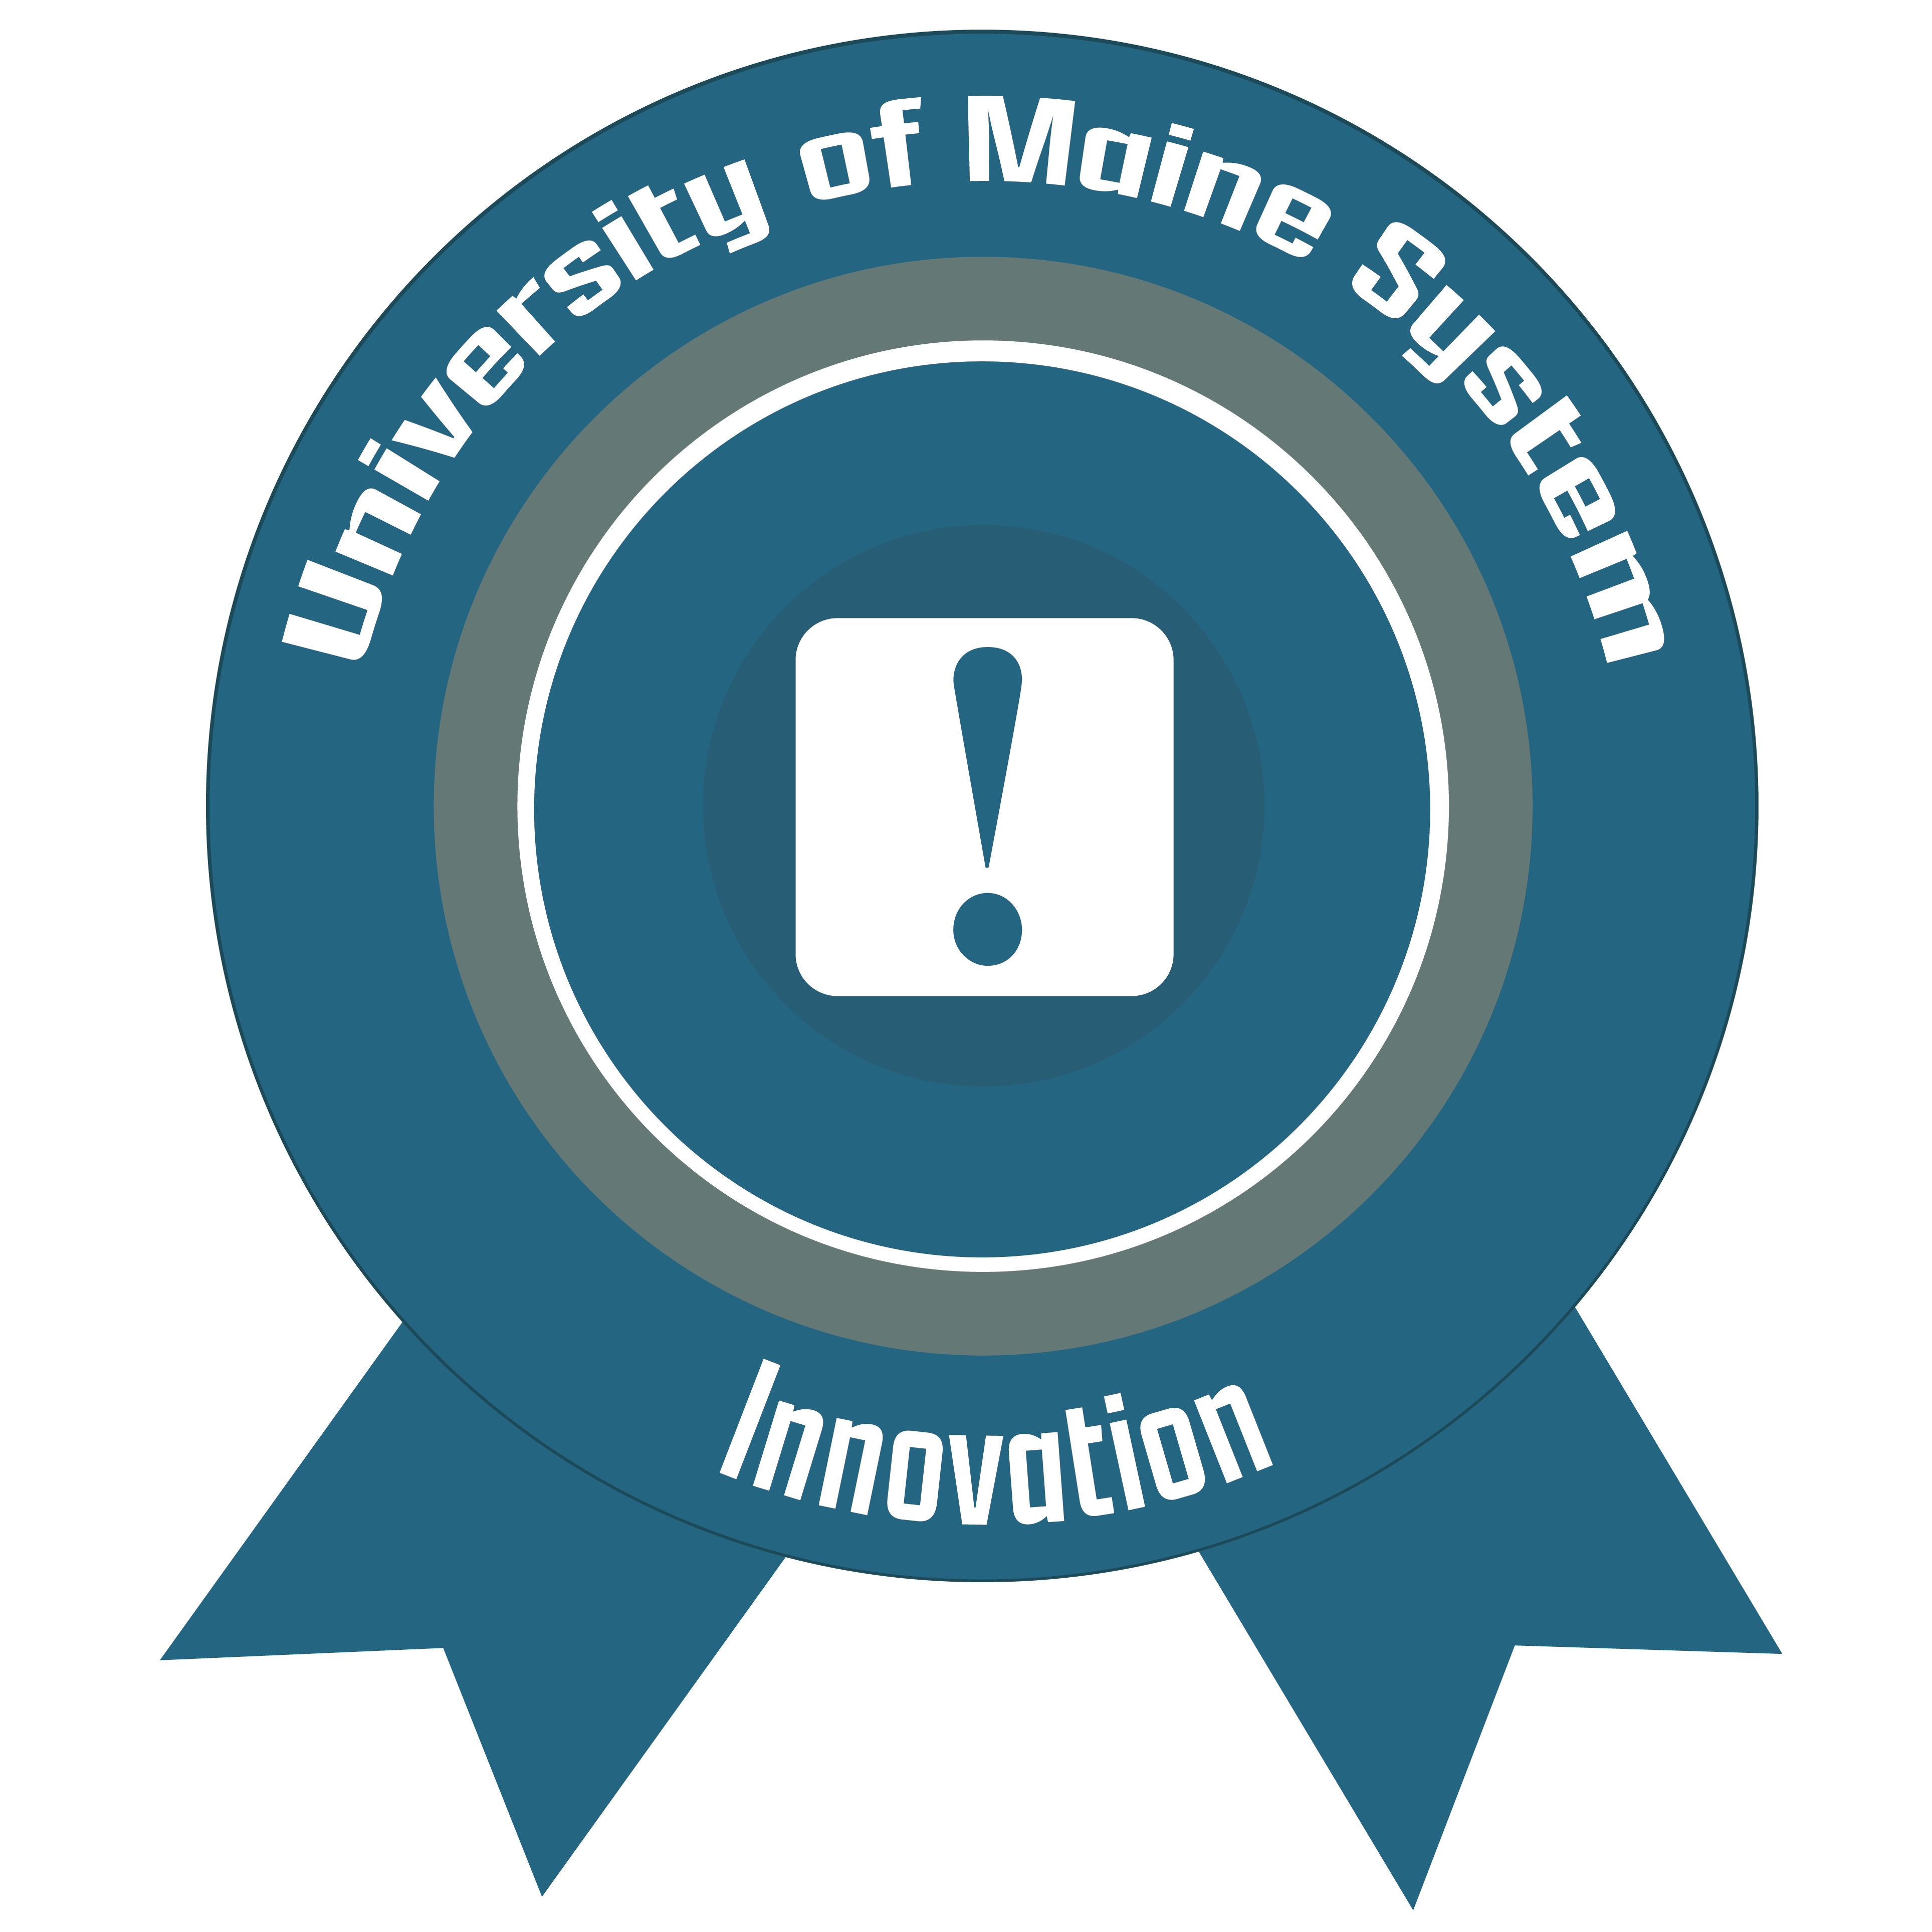 Ribbon icon with text: University of Maine System Innovation 